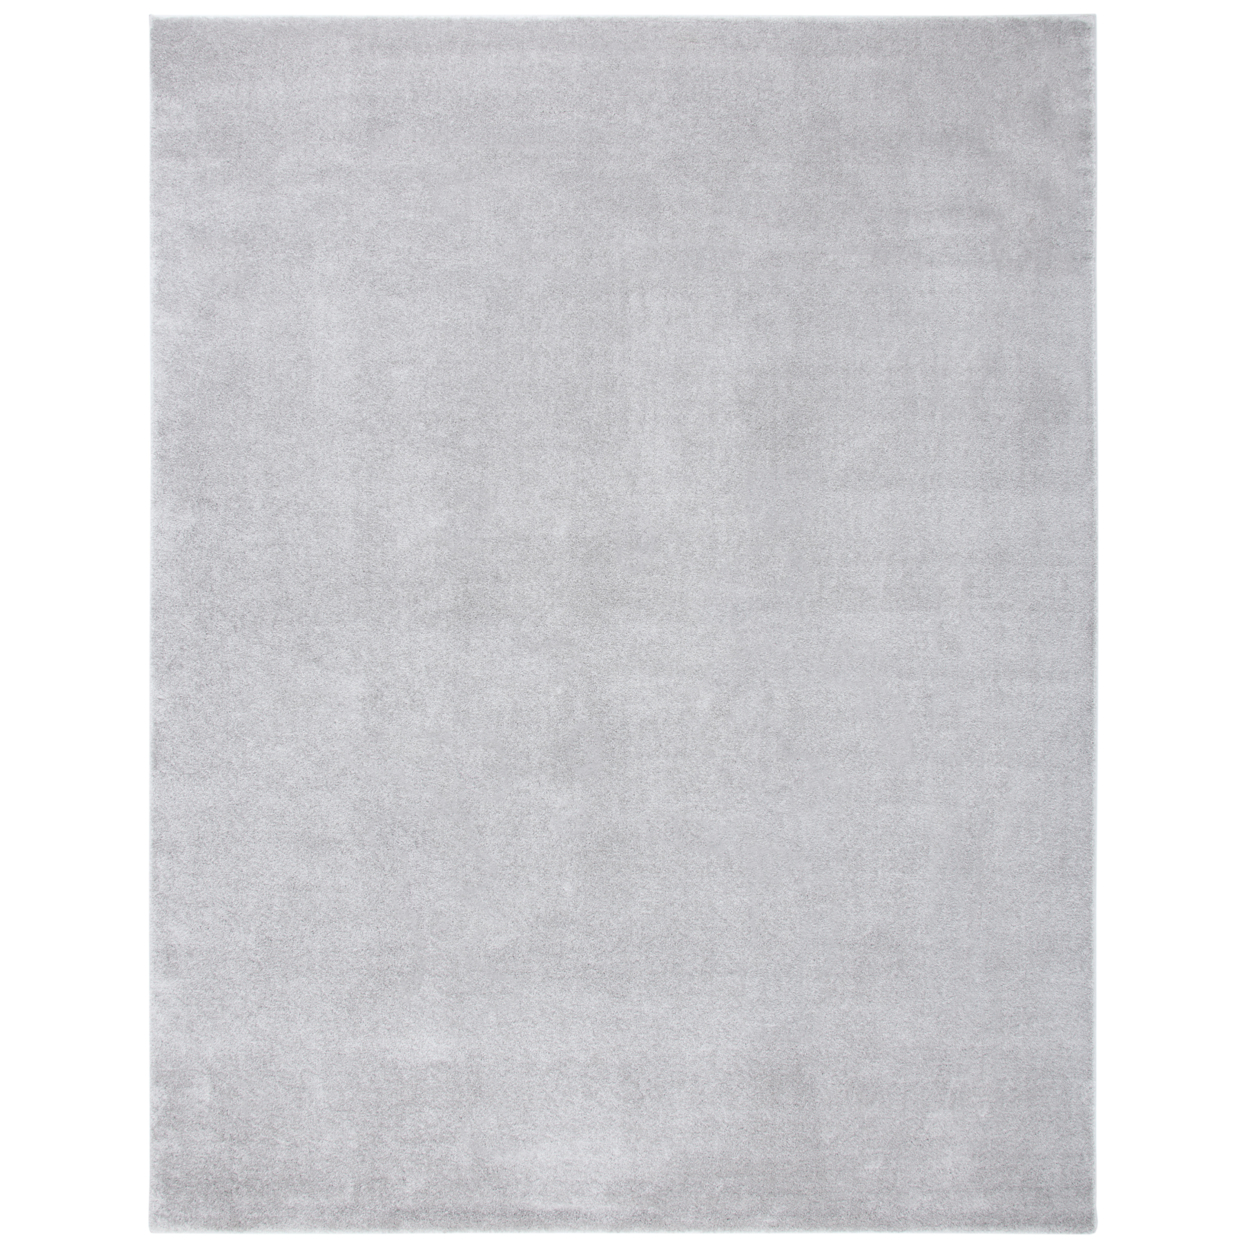 SAFAVIEH Pattern And Solid PNS320-4424 Light Grey Rug - 6' 7 X 9'